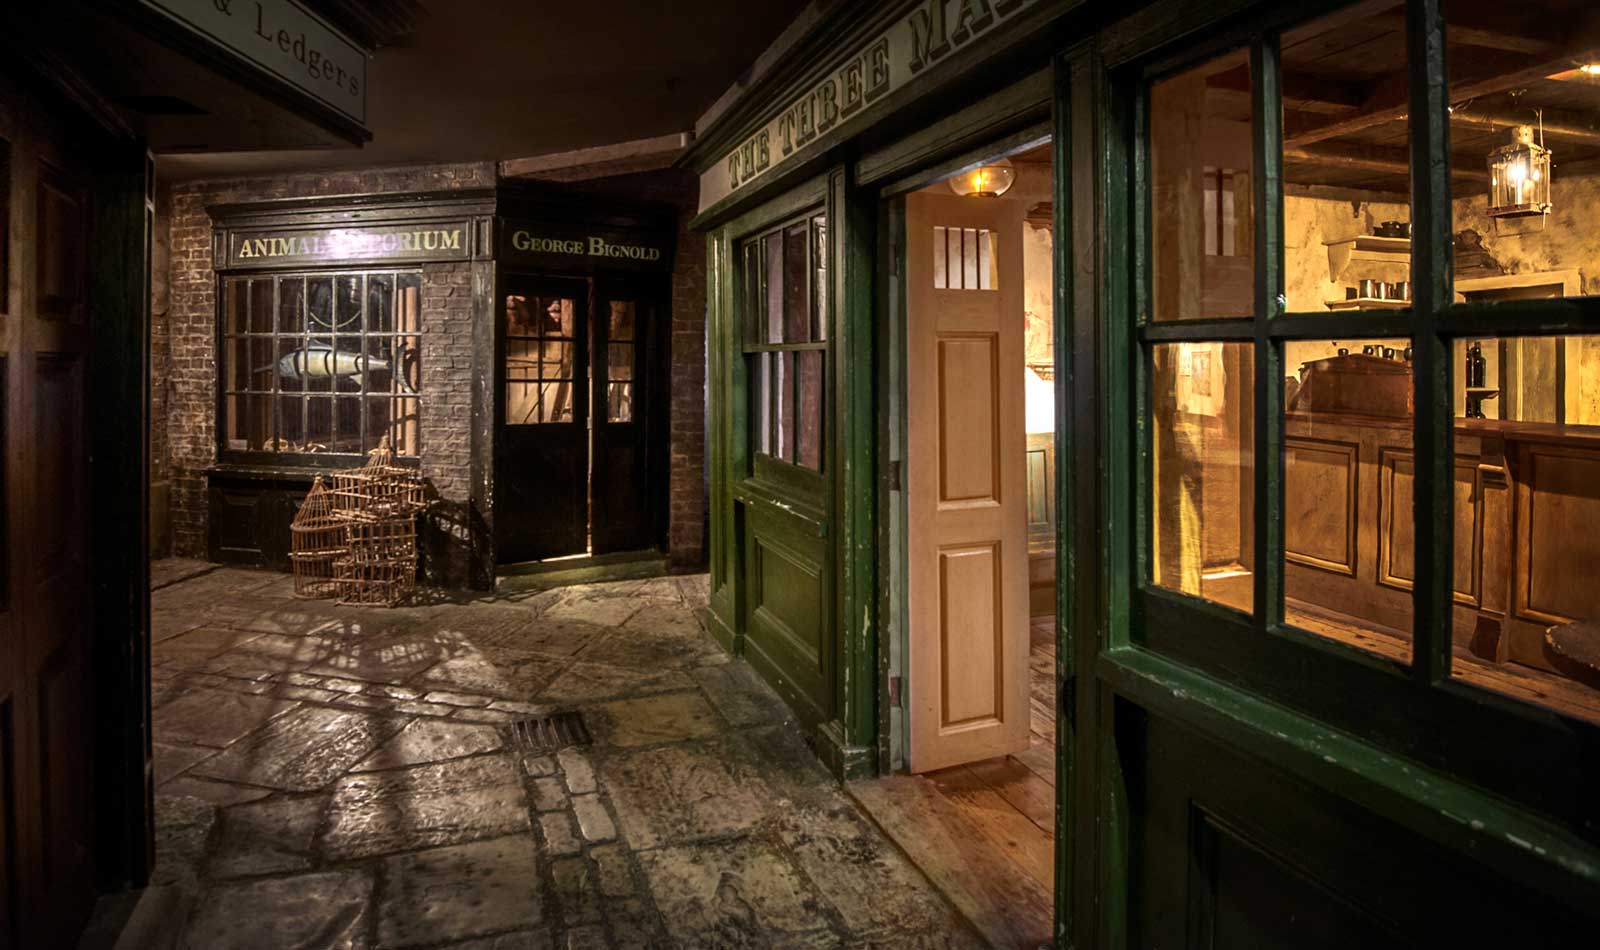 Sailortown gallery at the Museum of London Docklands